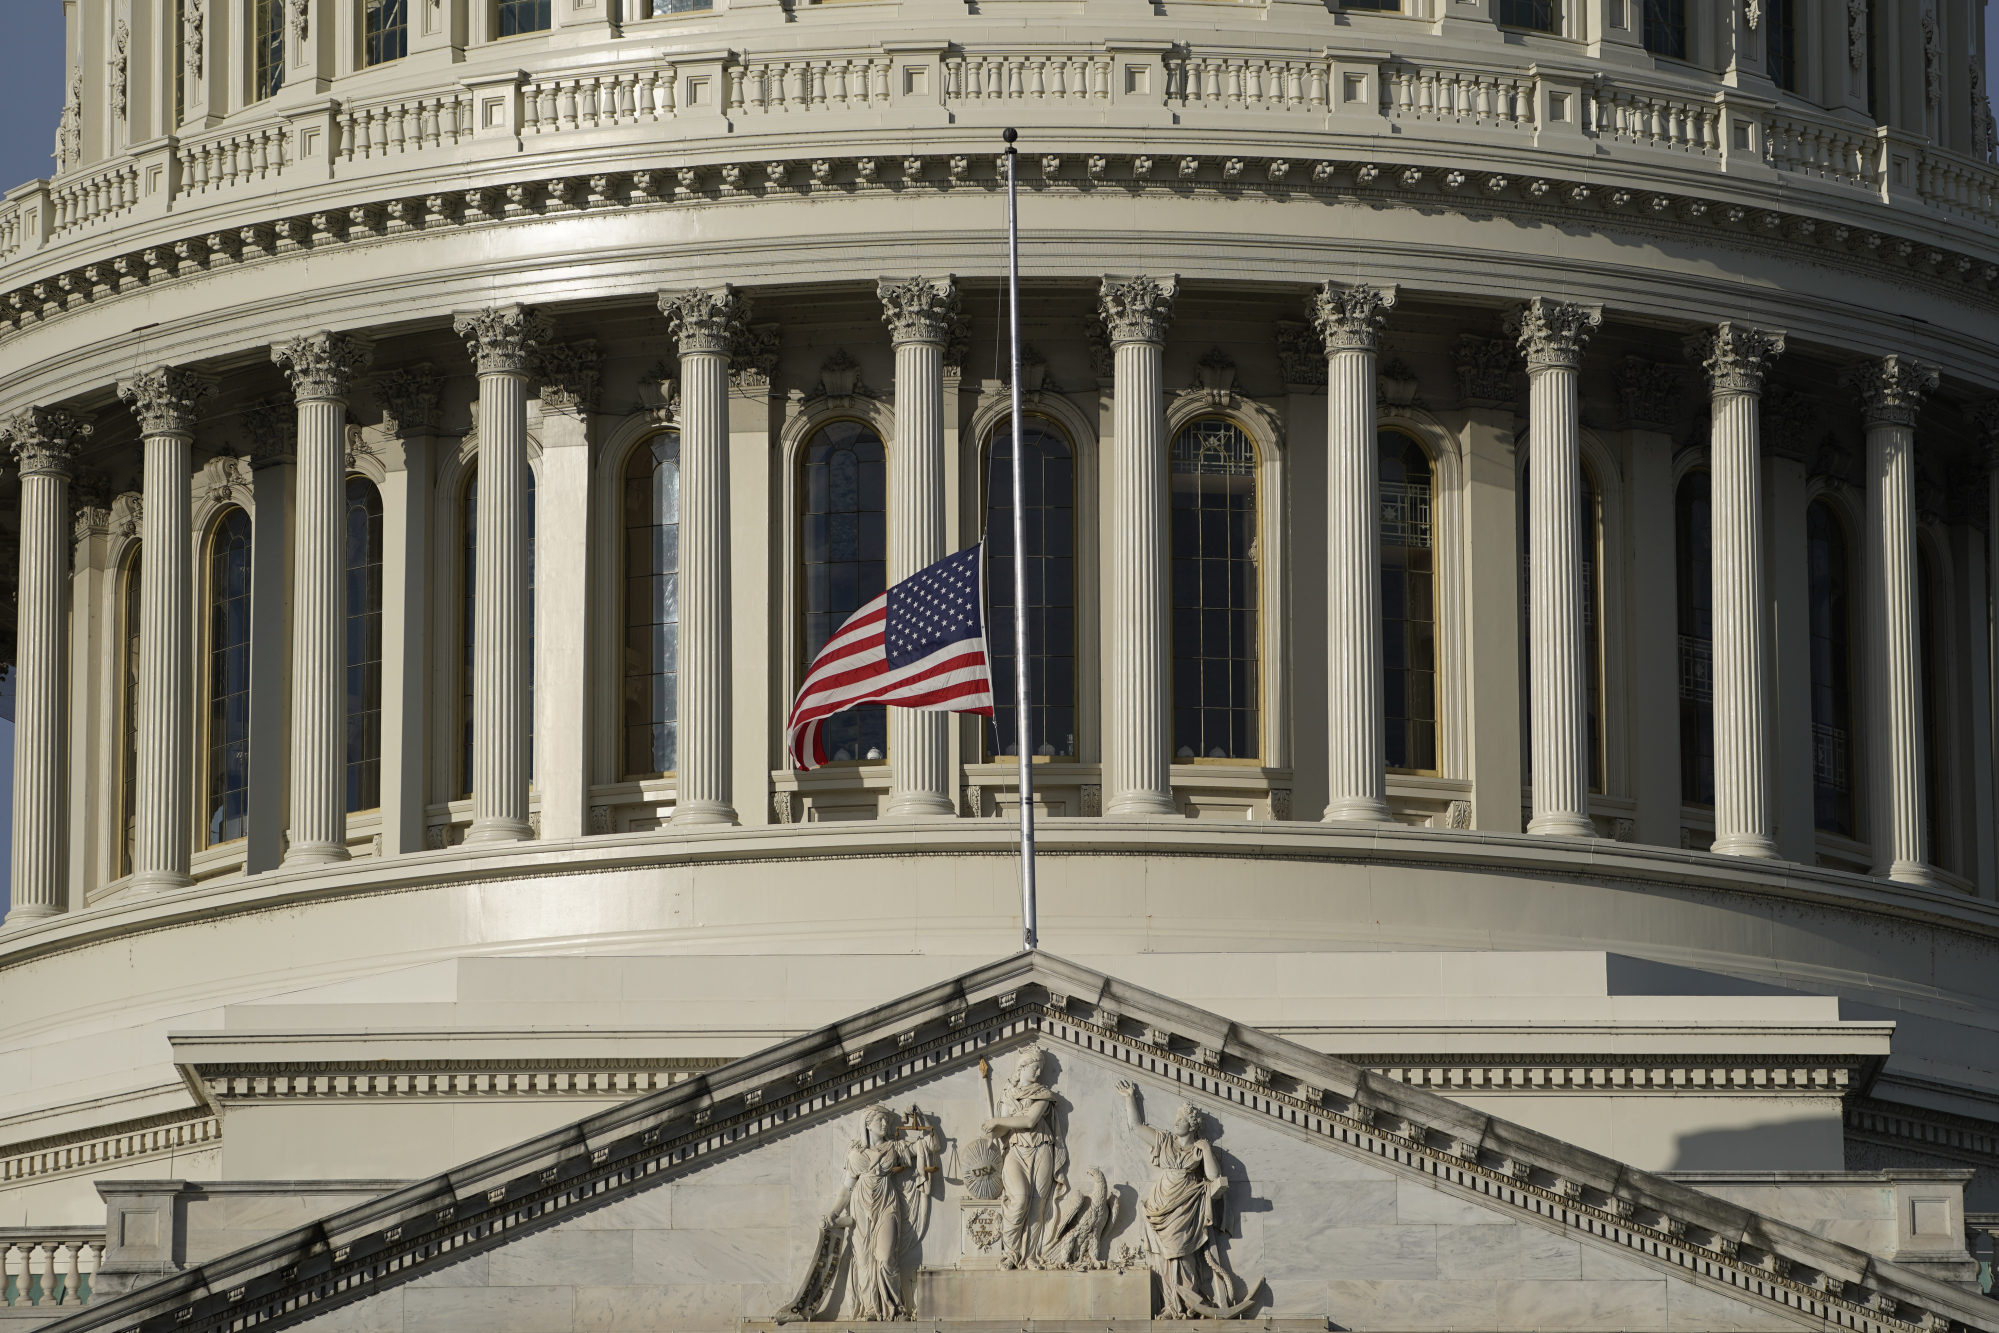 The US flag at half mast outside the US Capitol on the first anniversary of the deadly insurrection at the US Capitol in Washington, on January 6. With its semi-return to isolationism, the US has changed course on the international scene. Photo: Bloomberg